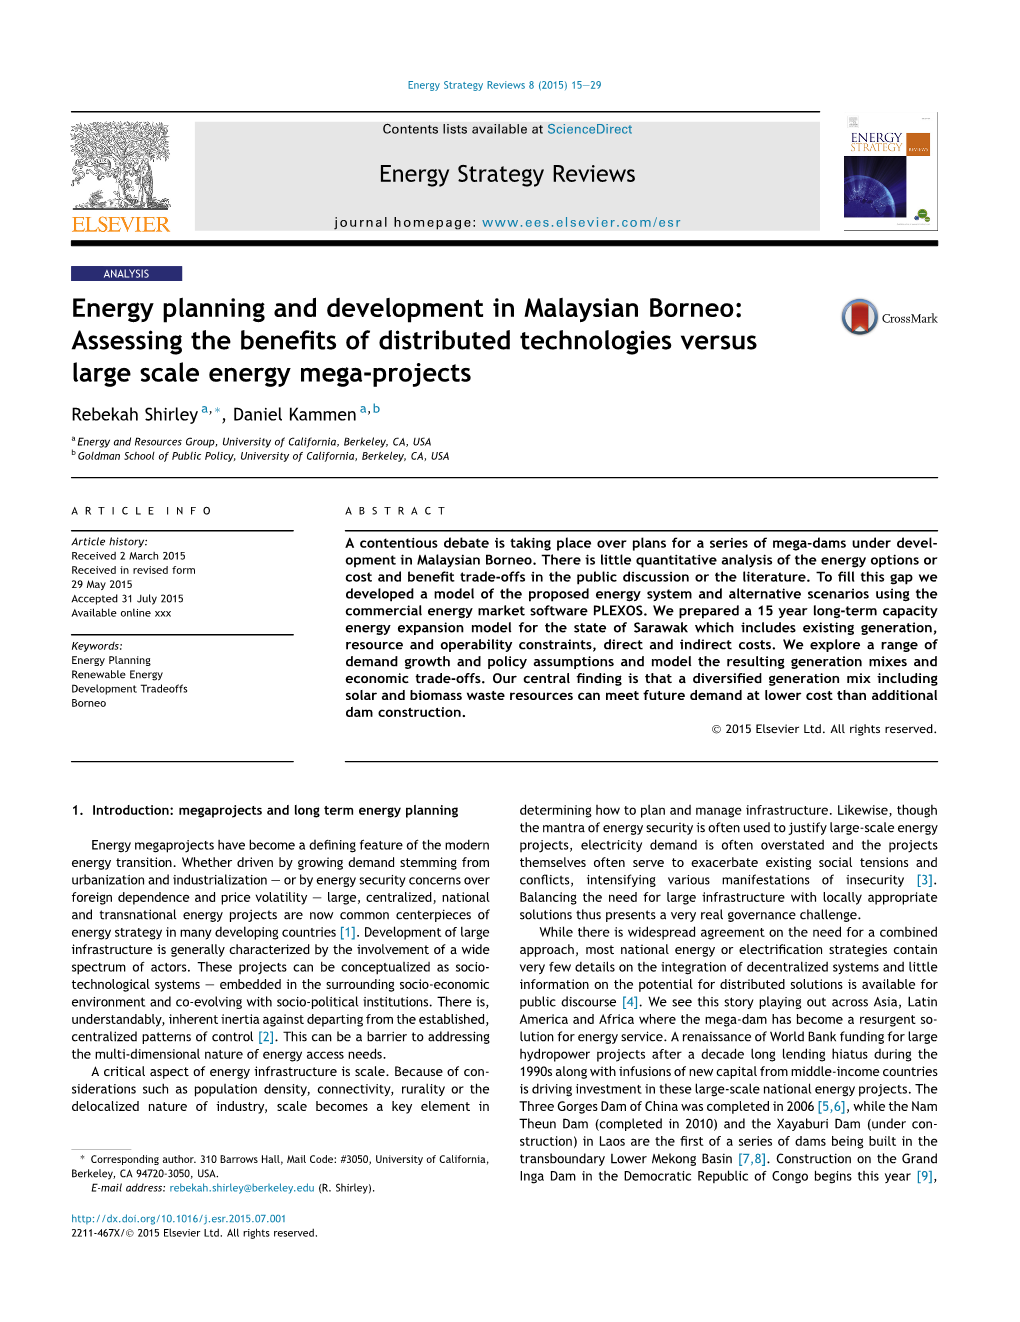 Energy Planning and Development in Malaysian Borneo: Assessing the Beneﬁts of Distributed Technologies Versus Large Scale Energy Mega-Projects